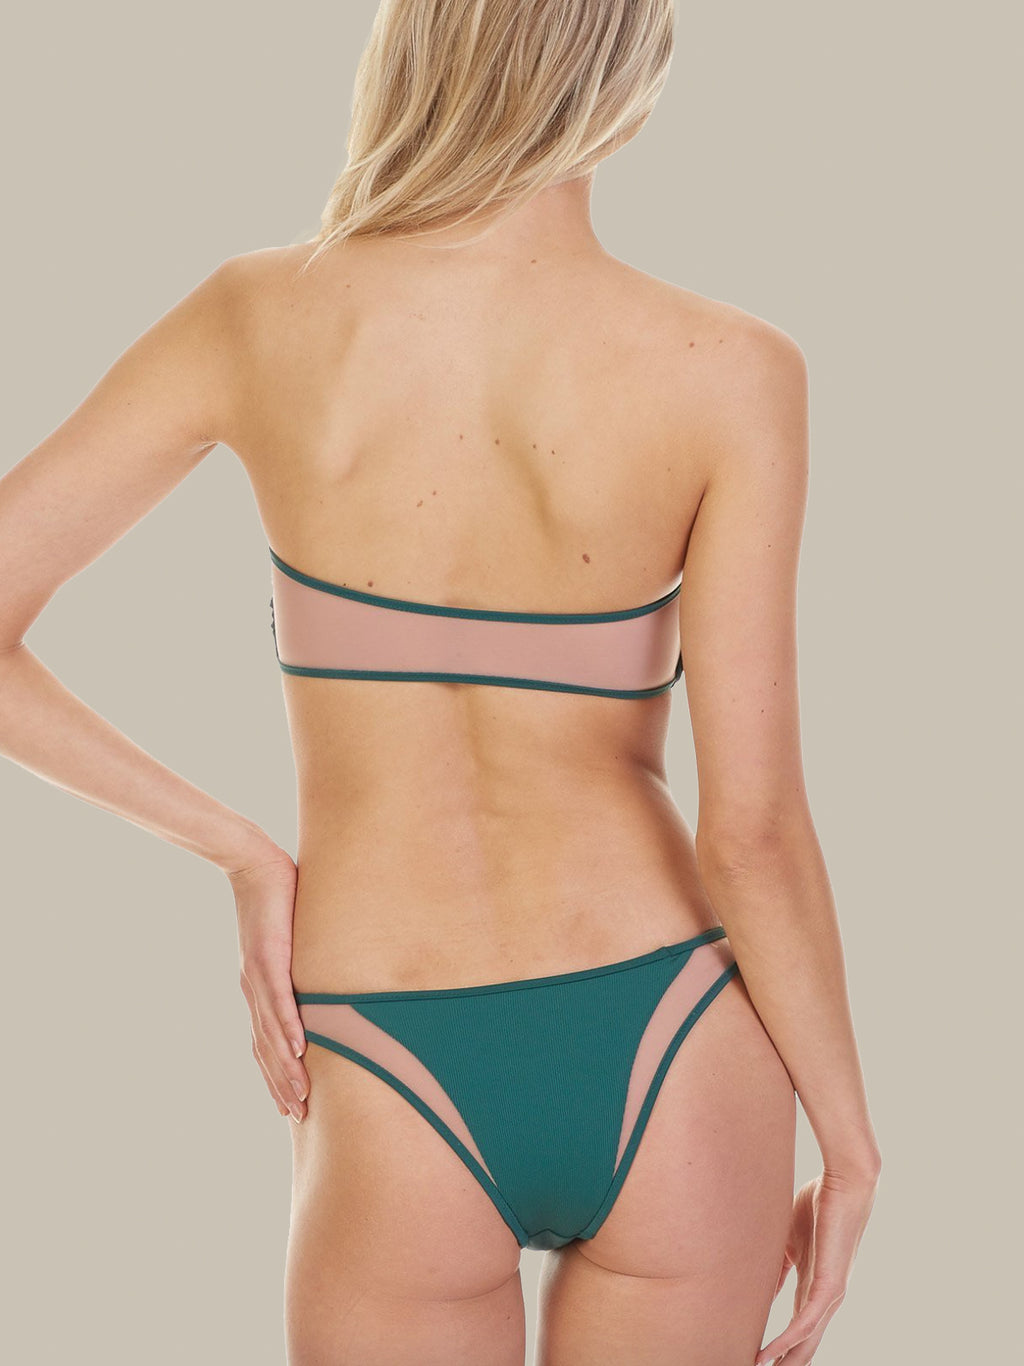 The Manon Bottoms are emerald green and feature mesh detail. These bikini bottoms also have minimal coverage and pair perfectly with the Royale Top.